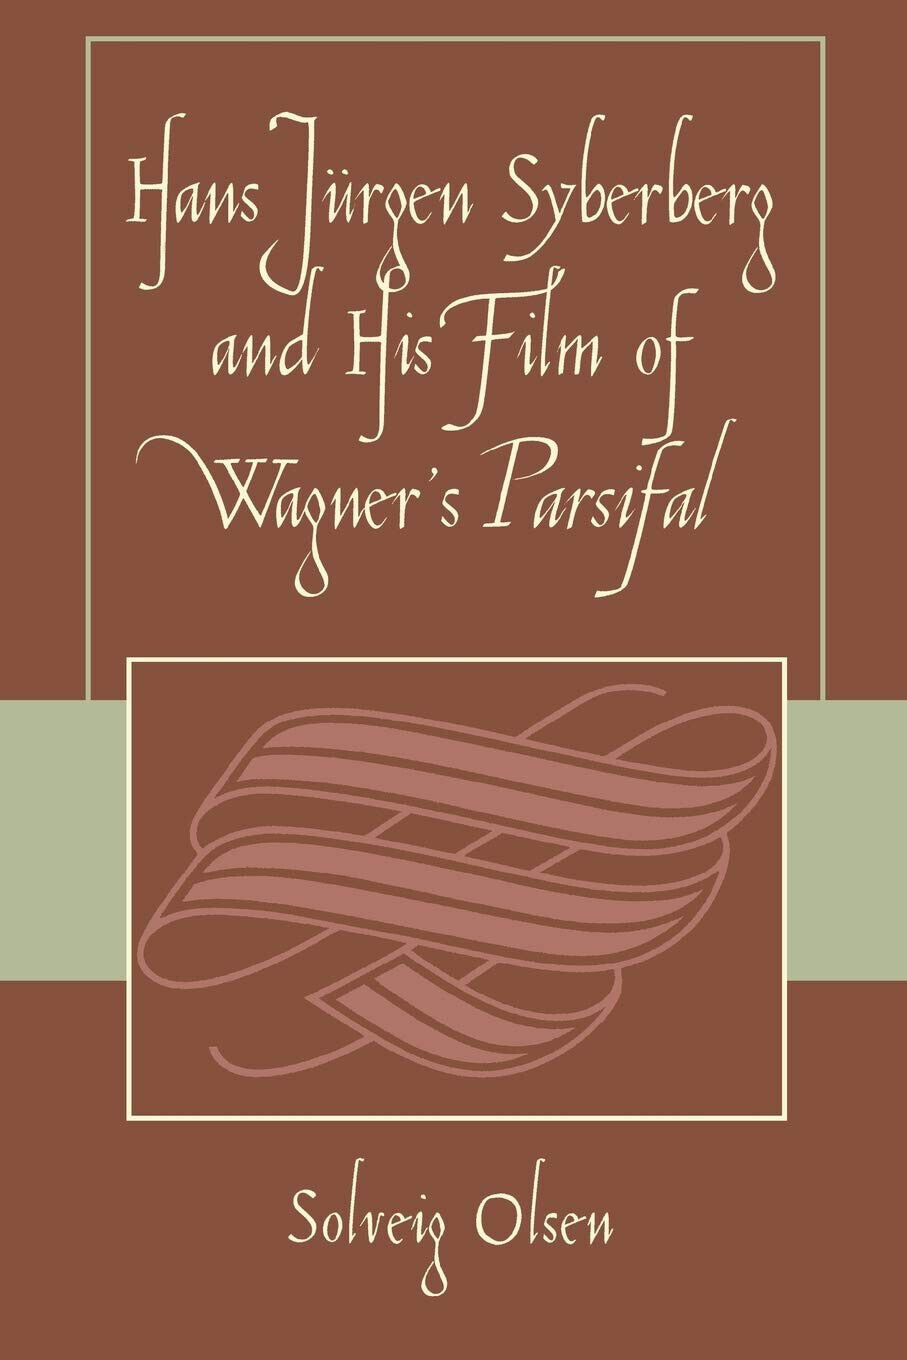 Hans Jurgen Syberberg and His Film of Wagner's Parsifal - Solveig Olsen - 2005 libro usato